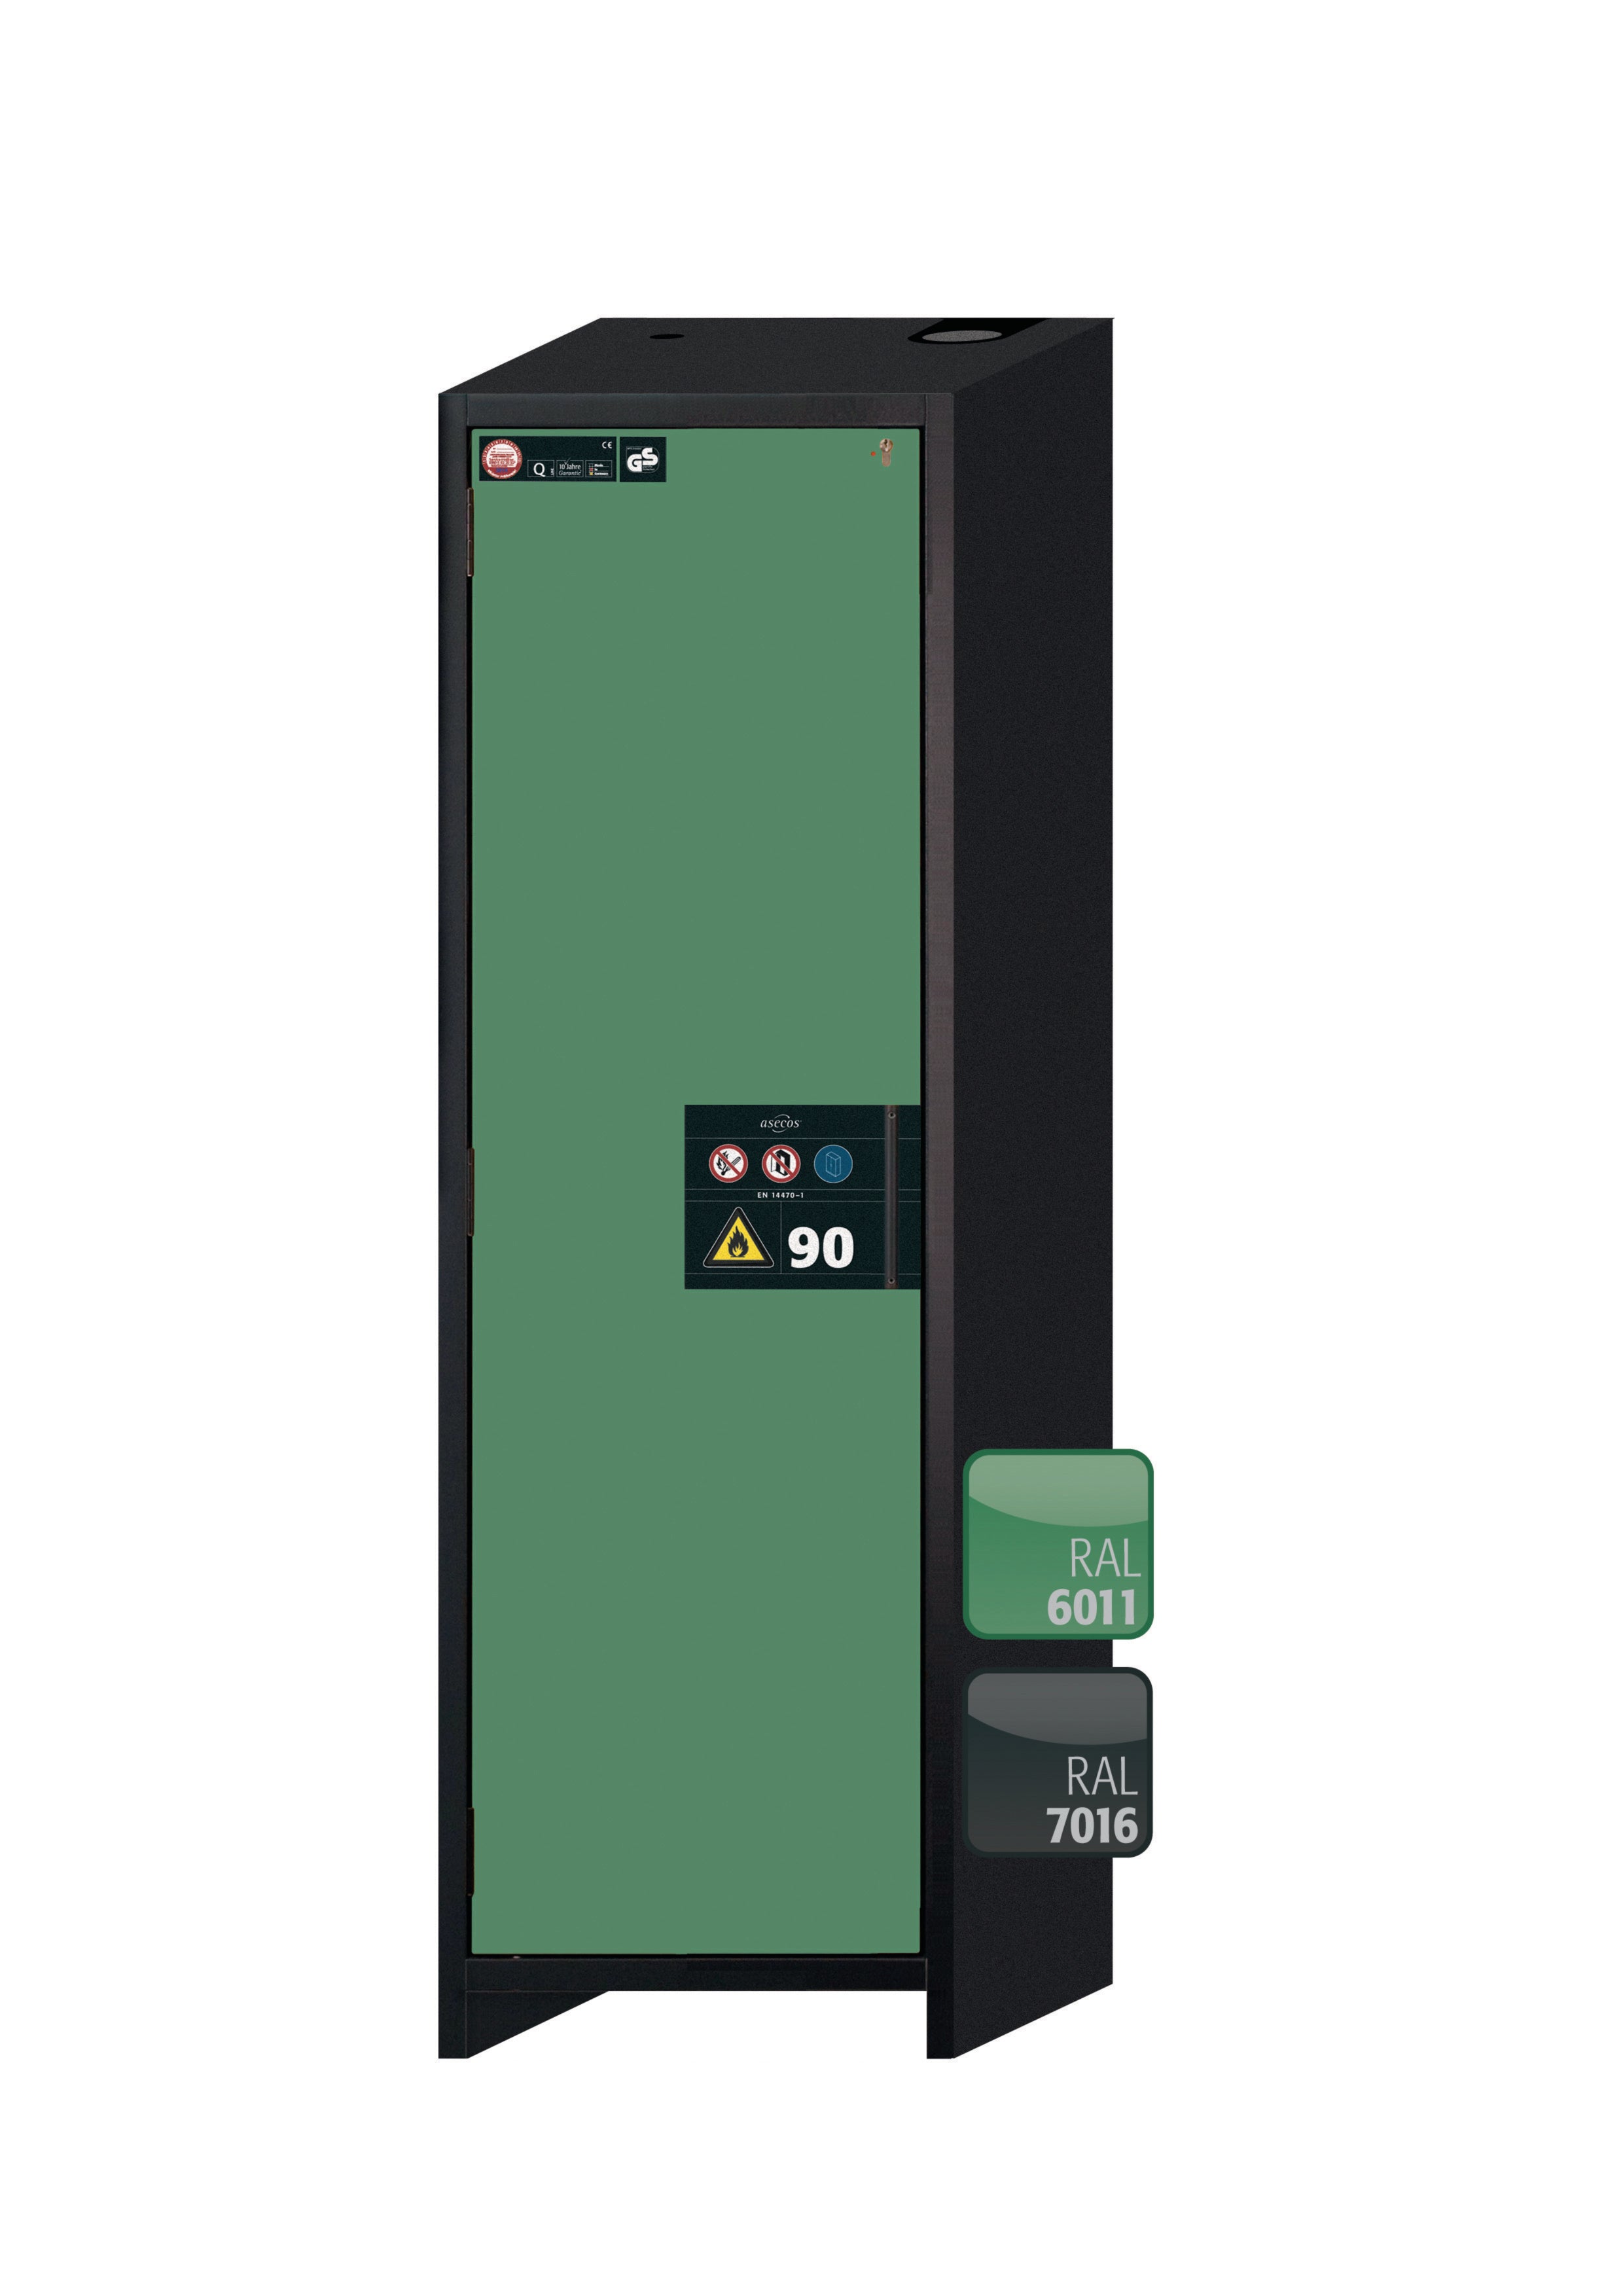 Type 90 safety storage cabinet Q-CLASSIC-90 model Q90.195.060 in reseda green RAL 6011 with 2x drawer (standard) (stainless steel 1.4301),